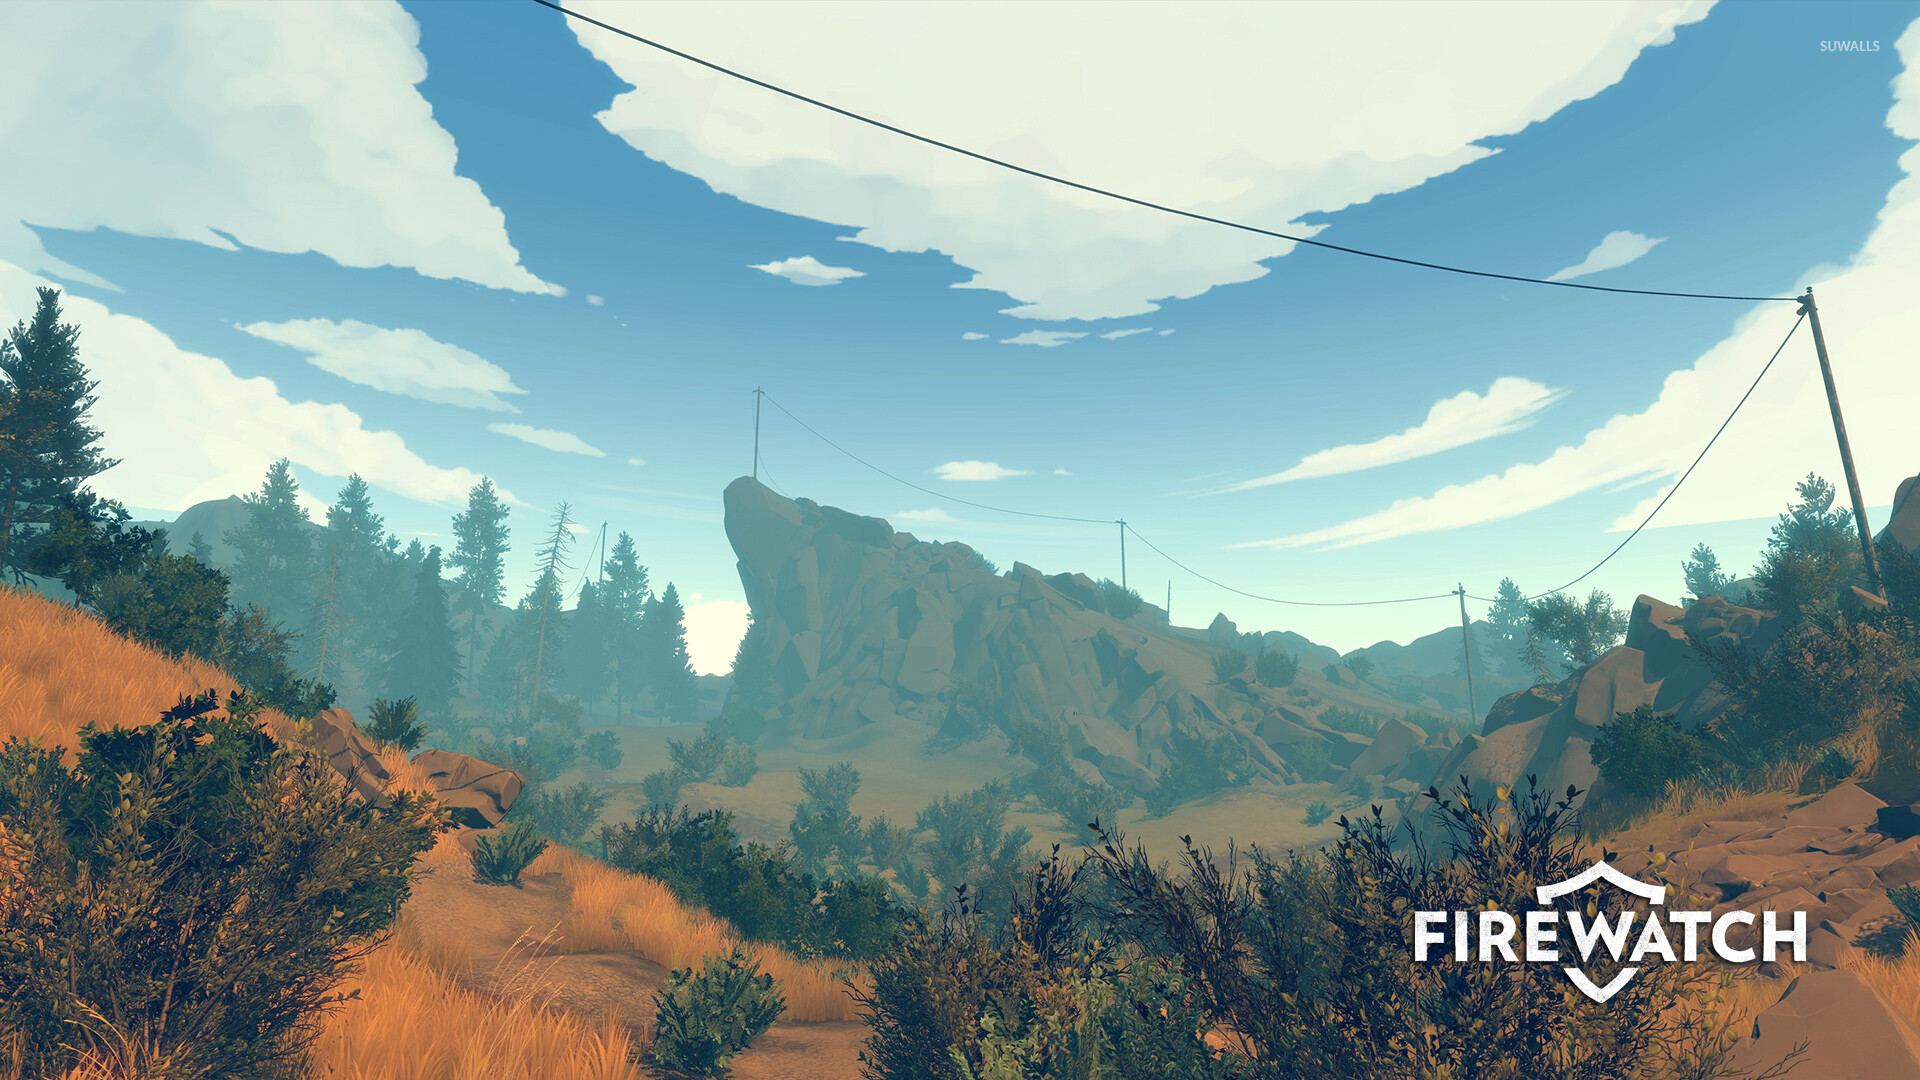 Firewatch: Utility pole through the forest, An action game by Campo Santo. 1920x1080 Full HD Background.